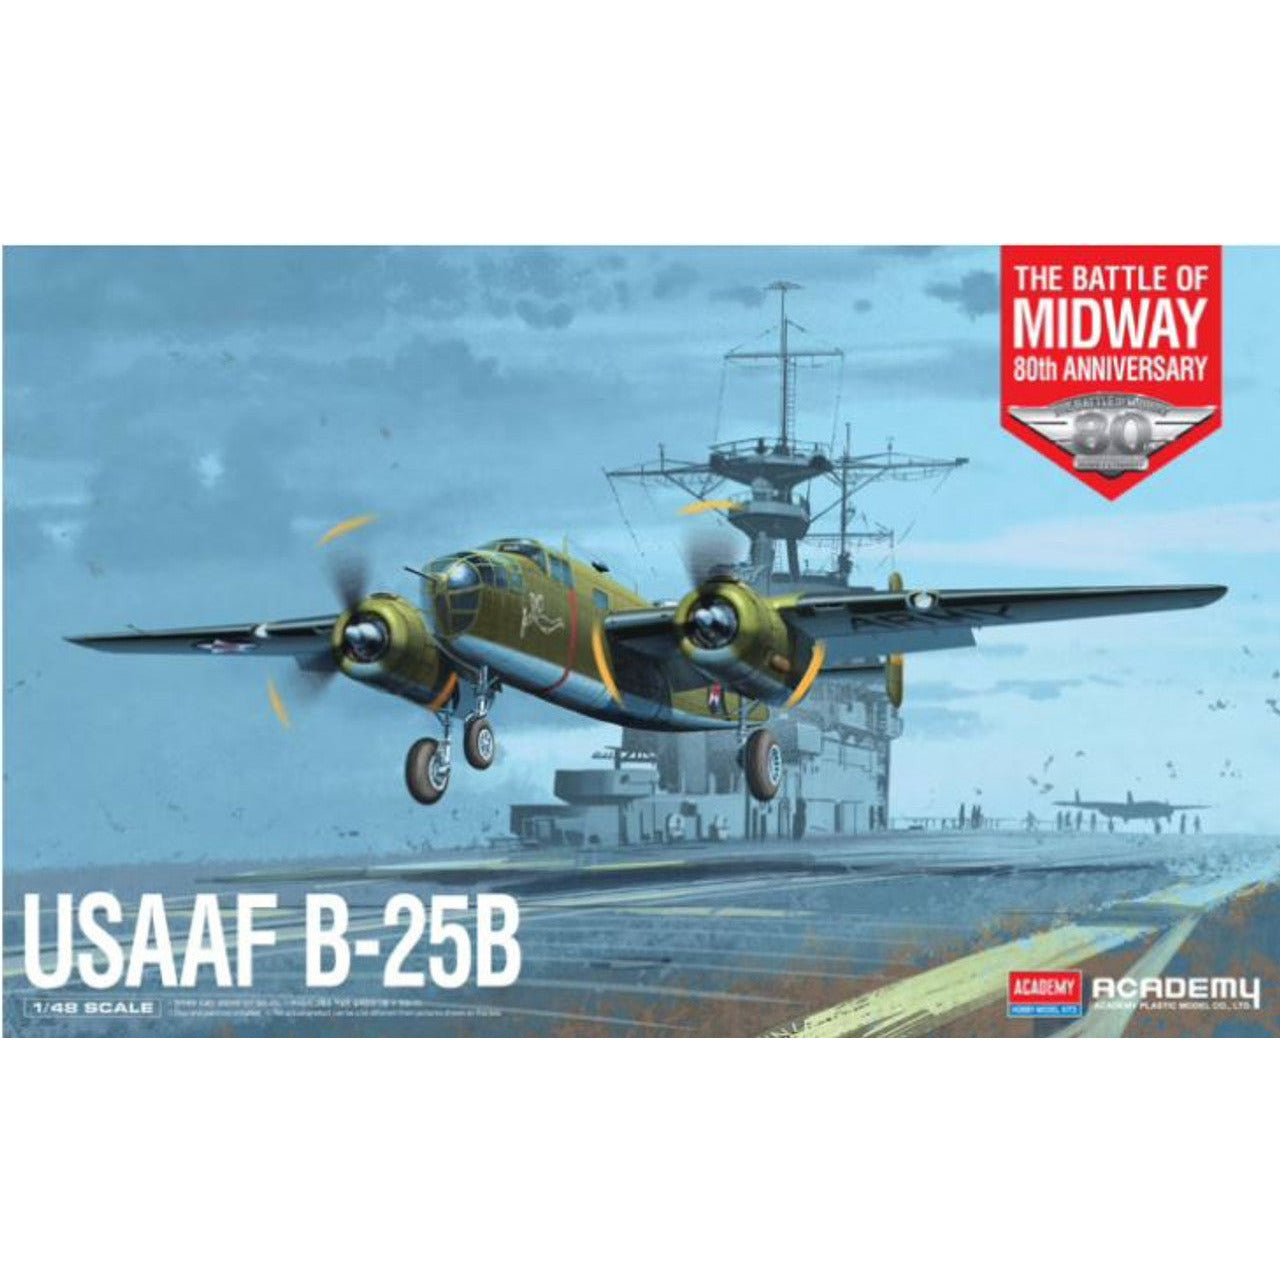 ACADEMY 1/48 USAAF B-25B Battle of Midway 80th Anniversary